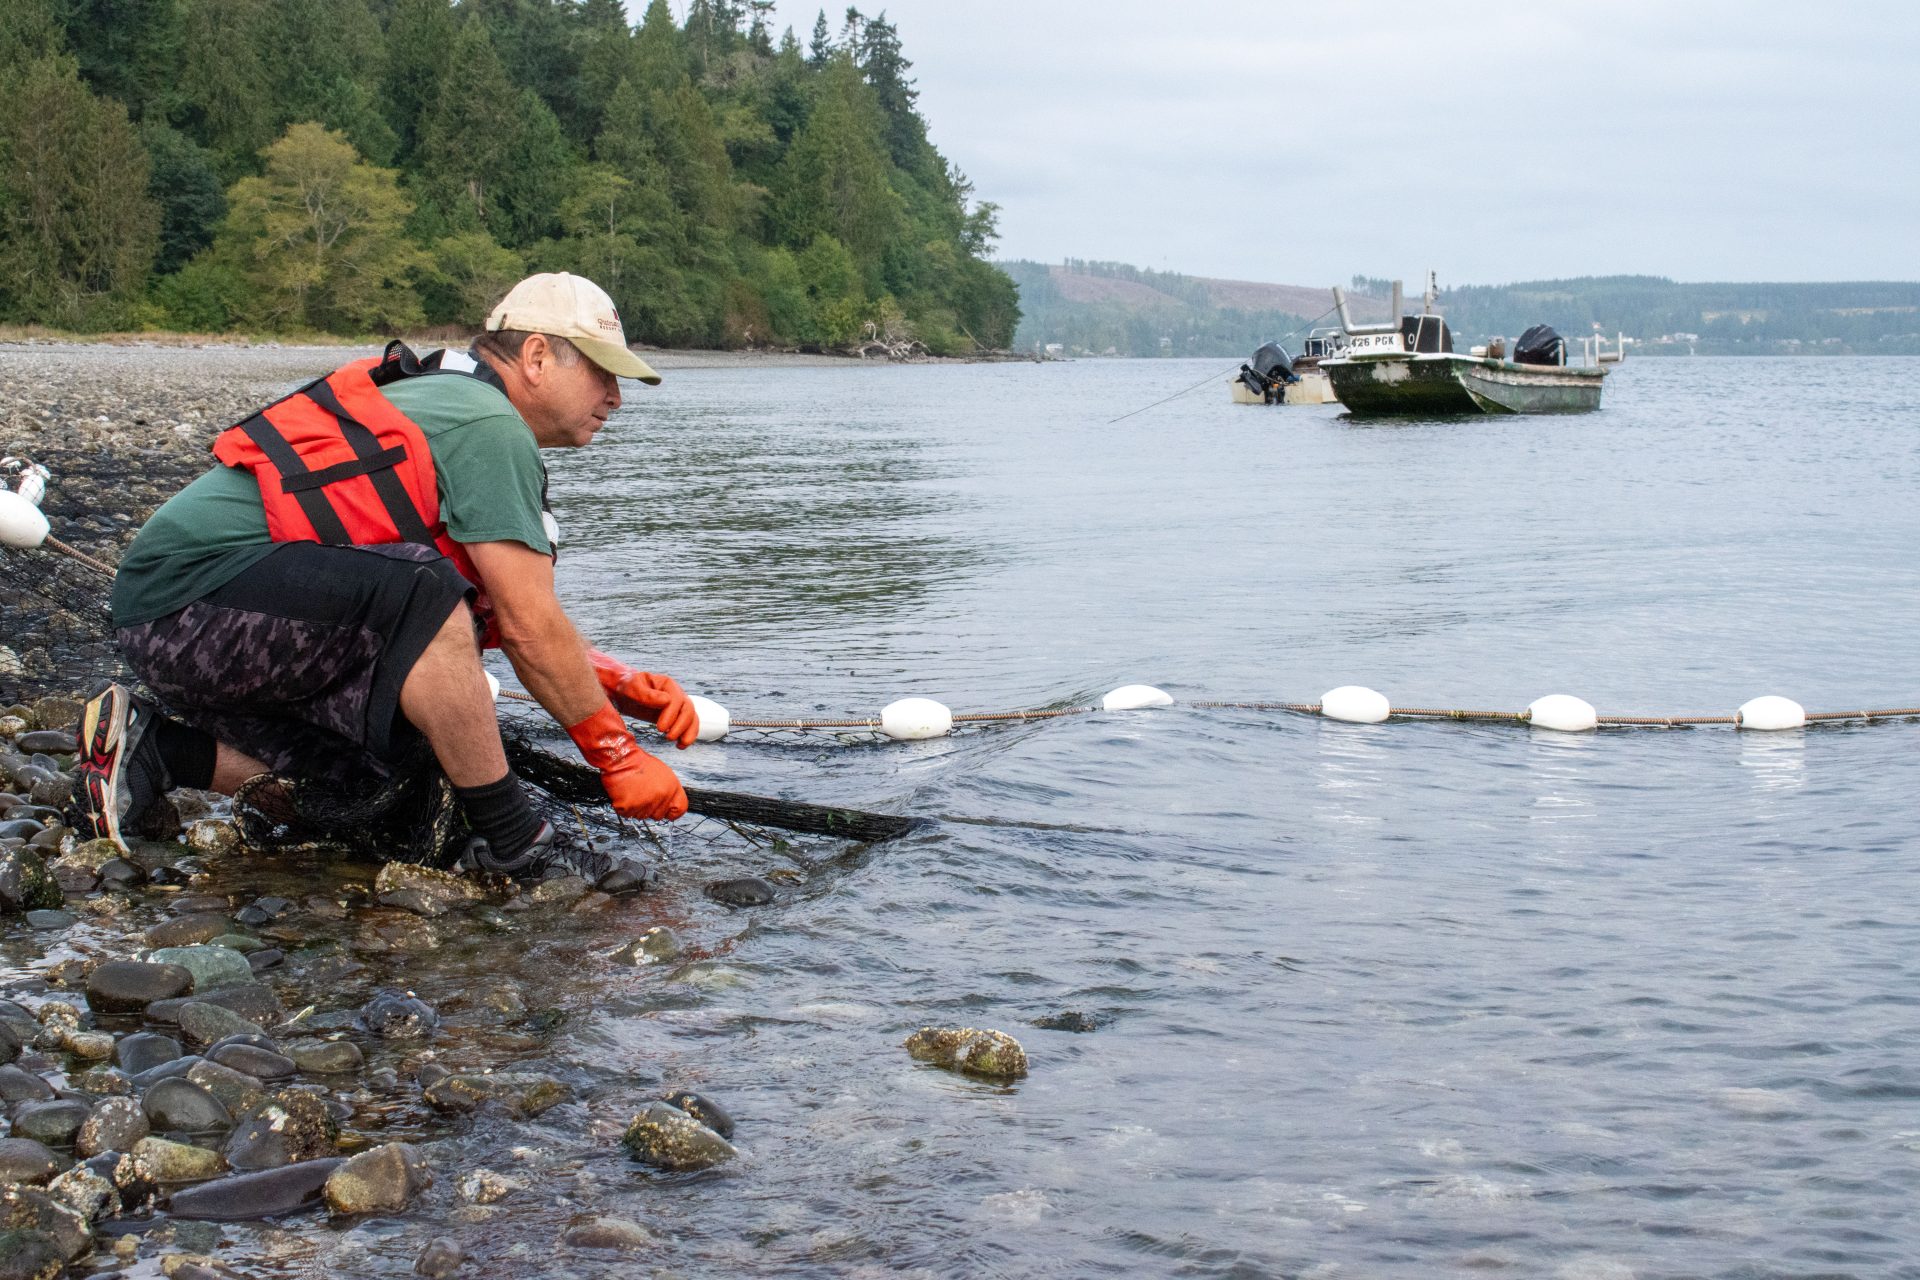 What’s killing Hood Canal salmon? Tags offer clues